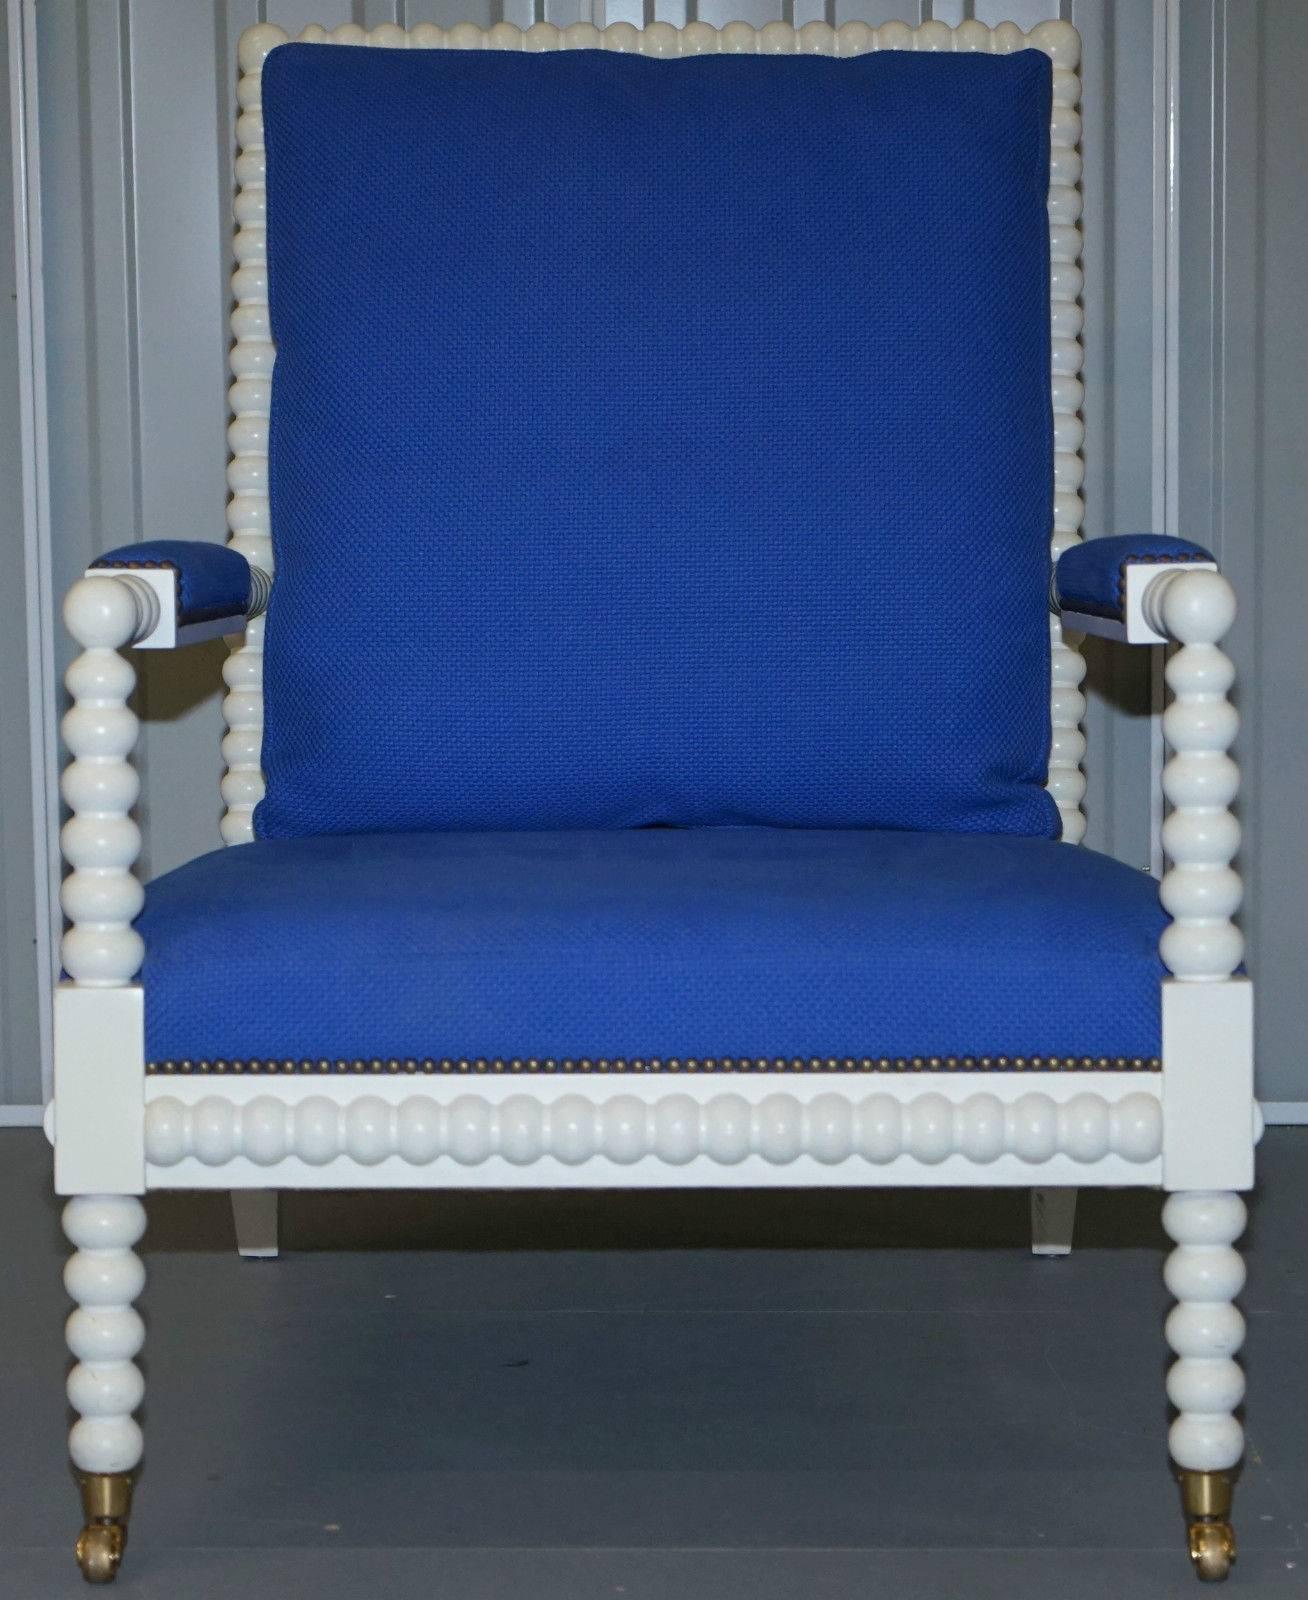 Wimbledon-Furniture

We are delighted to offer for sale this stunning Ralph Lauren RRP £4500 New Bohemian Spindle armchair

Please note the delivery amounts listed are just a guide, for an accurate cost please send me your postcode 

Based on the